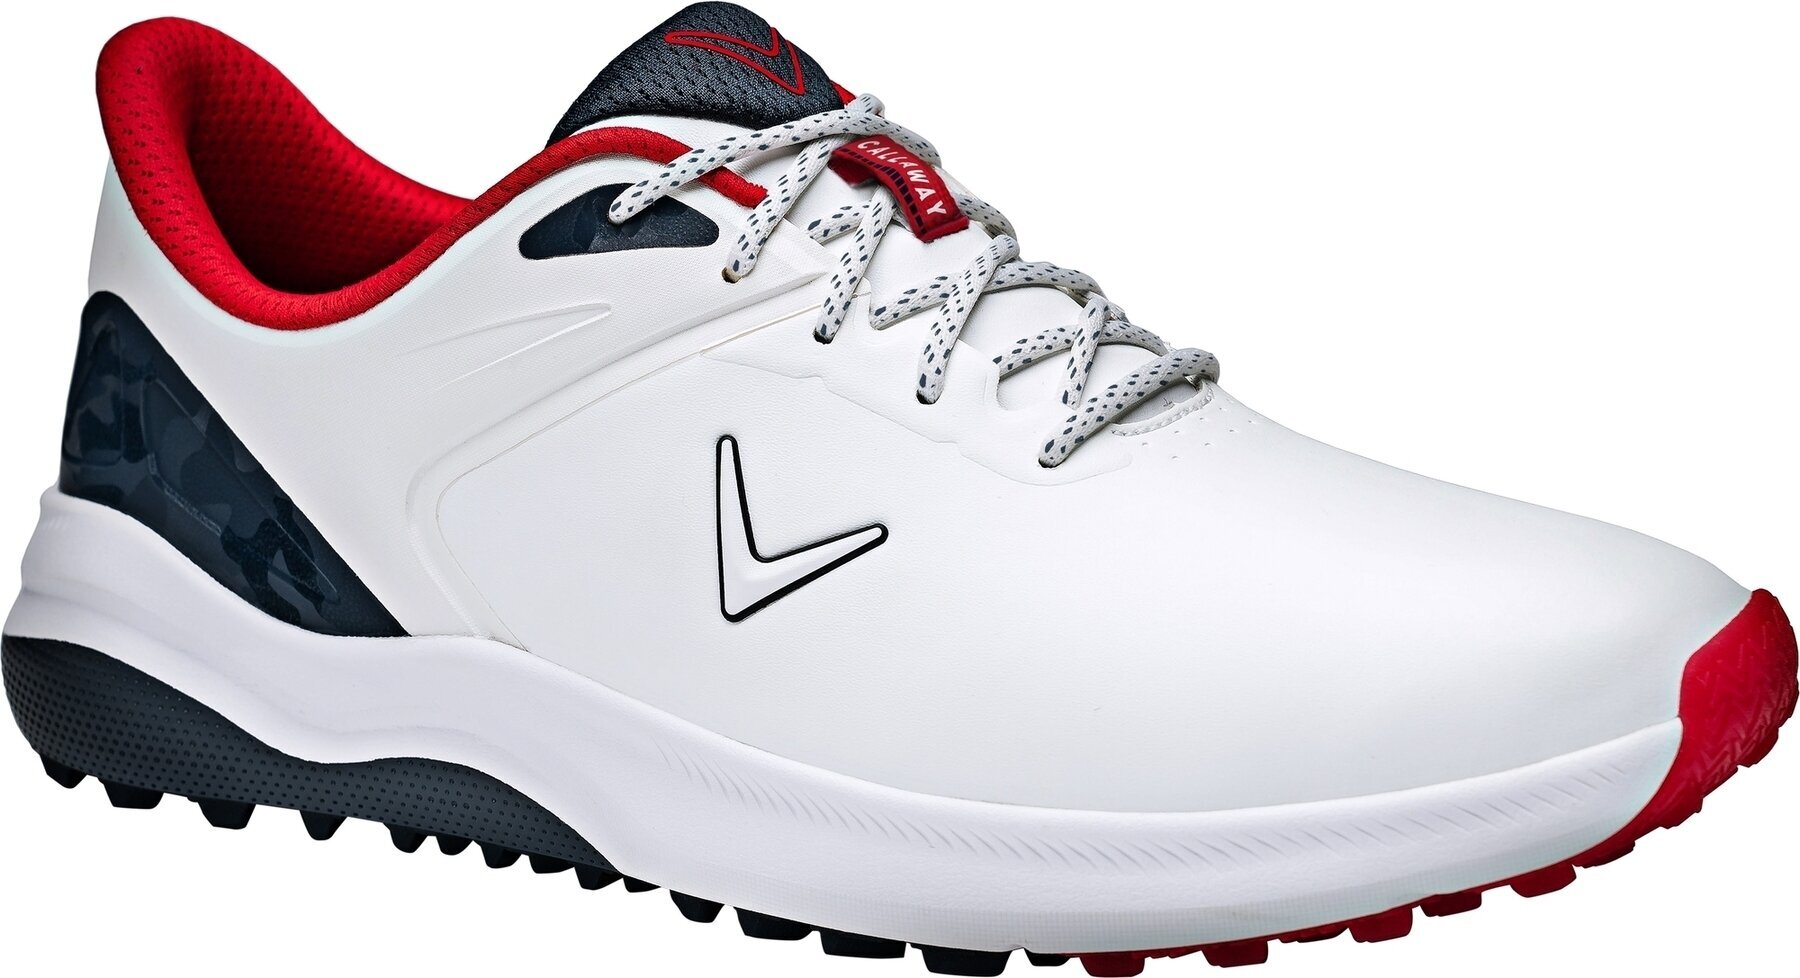 Men's golf shoes Callaway Lazer Mens Golf Shoes White/Navy/Red 42,5